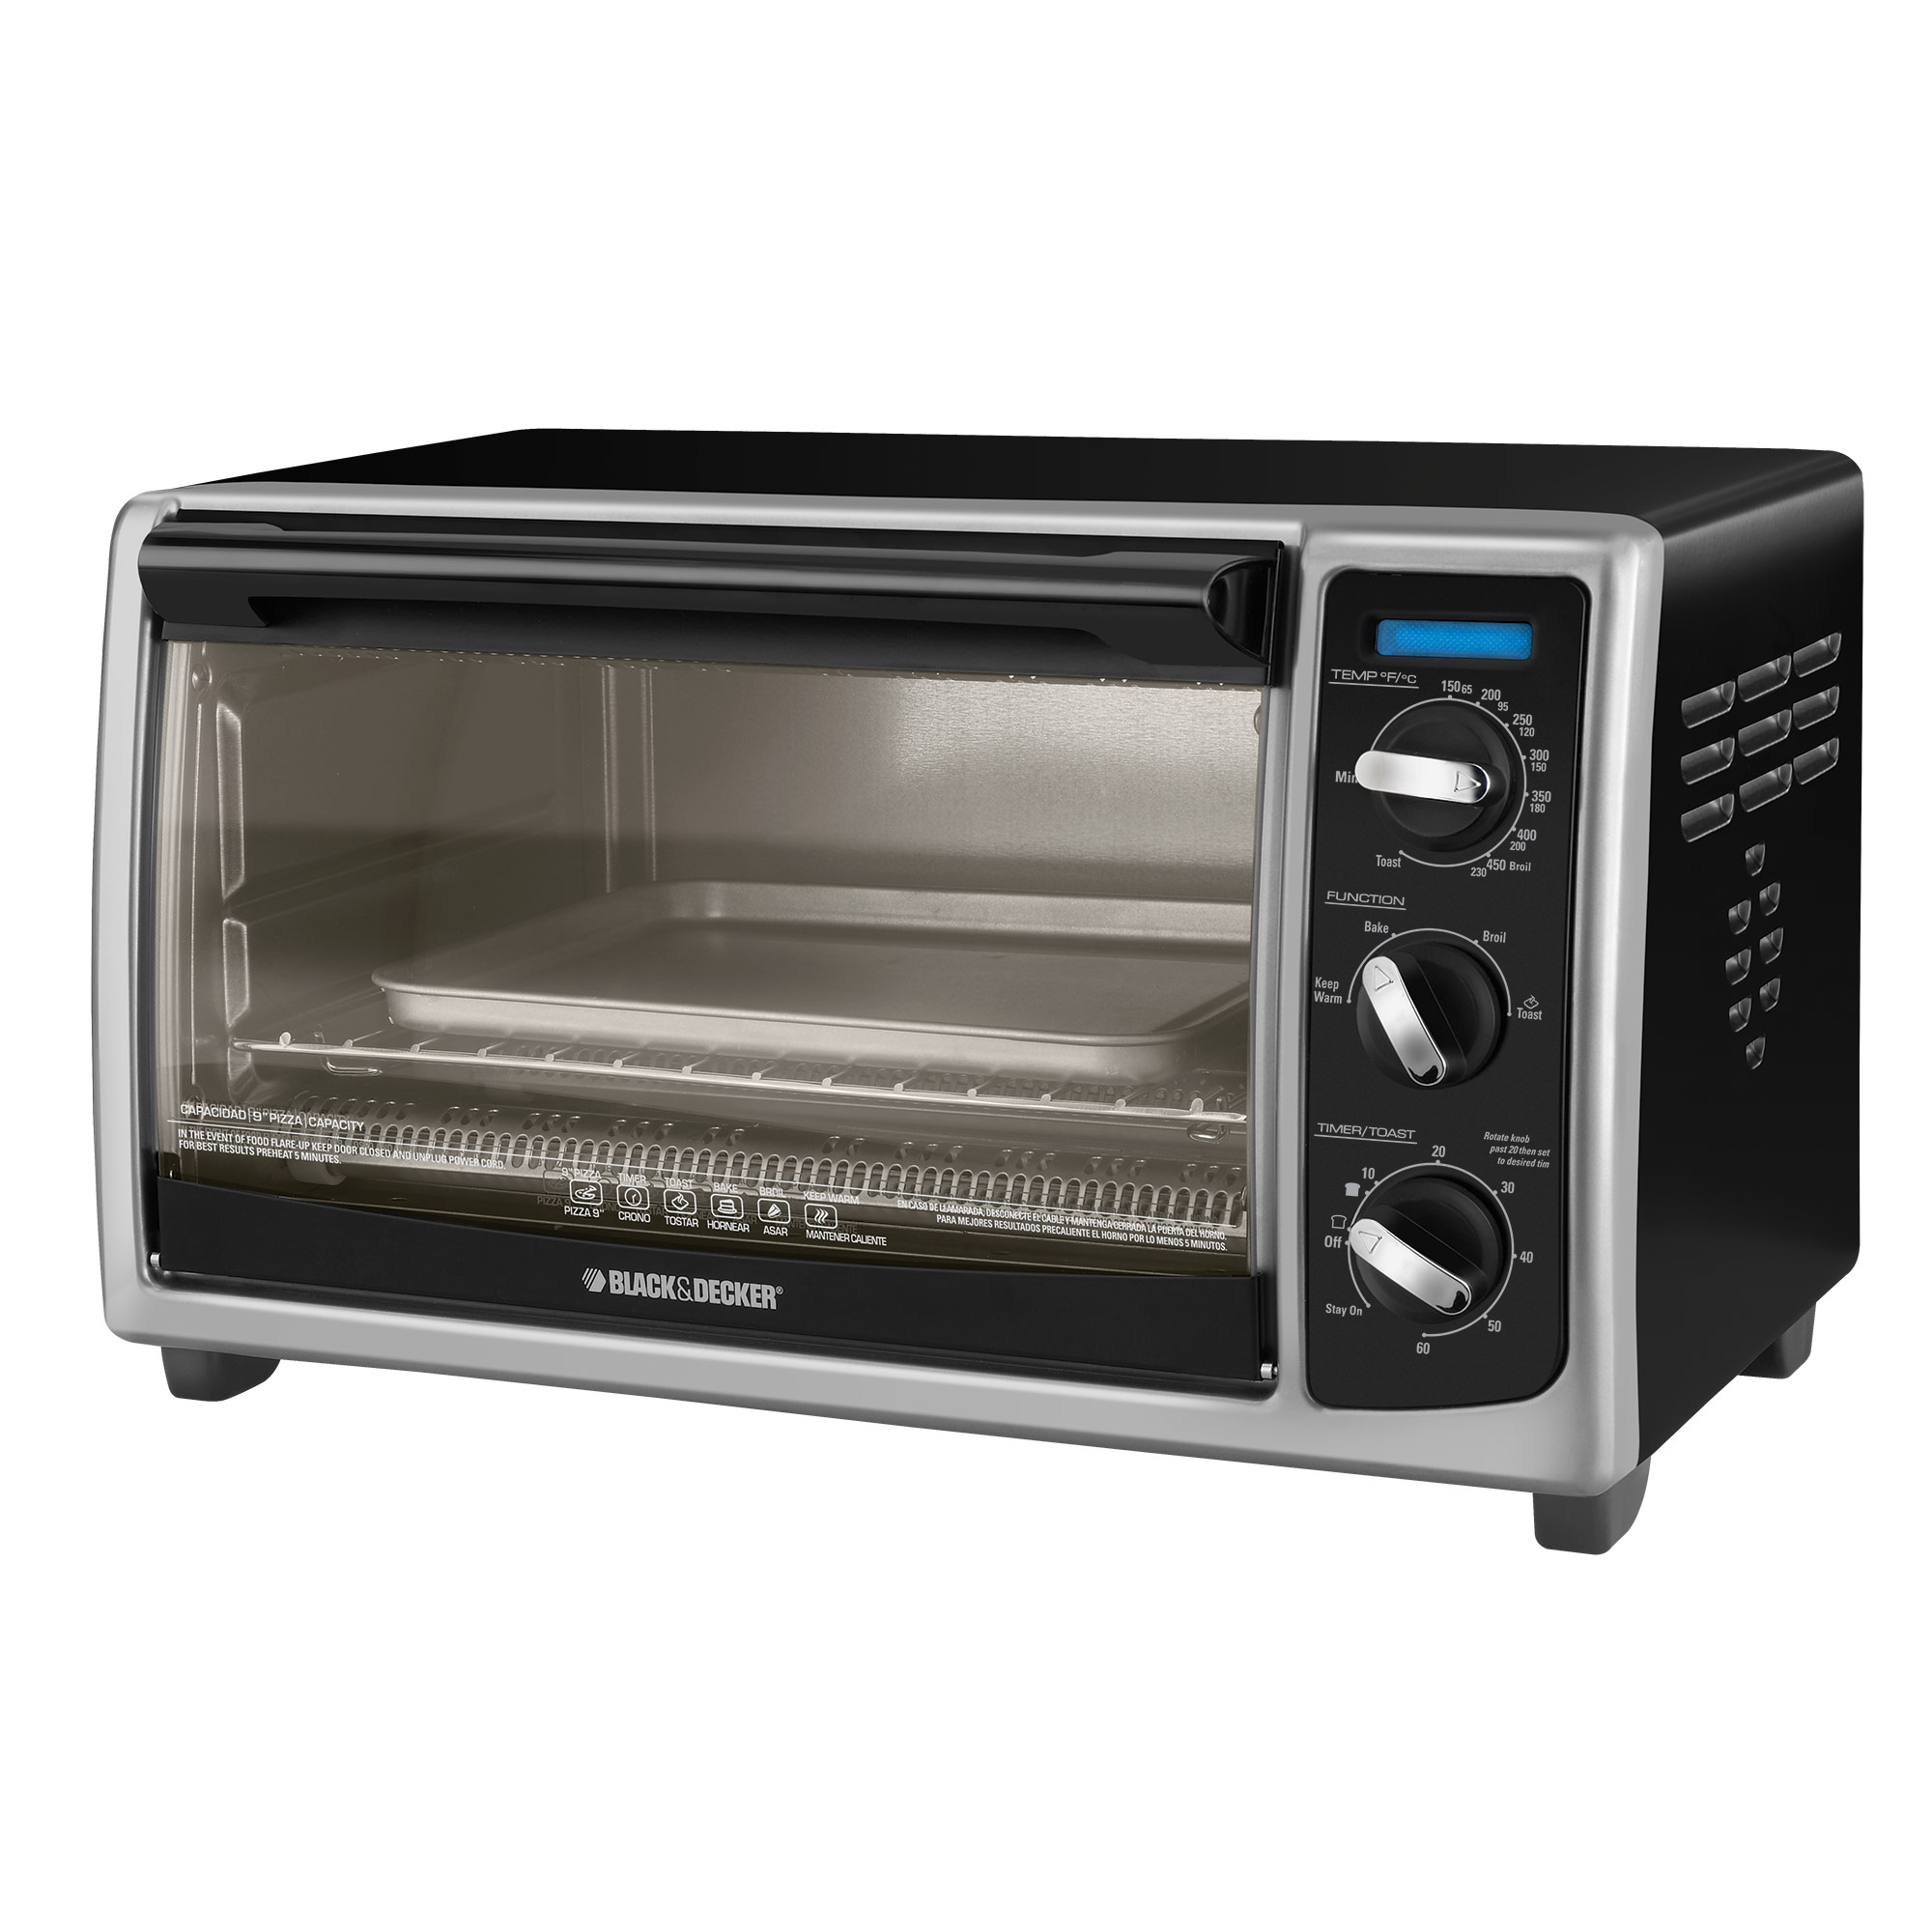 https://s7cdn.spectrumbrands.com/~/media/SmallAppliancesUS/Black%20and%20Decker/Product%20Page/cooking%20appliances/convection%20and%20toaster%20ovens/TO1485B/TO1485B_Callout.jpg?h=2000&la=en&w=2000